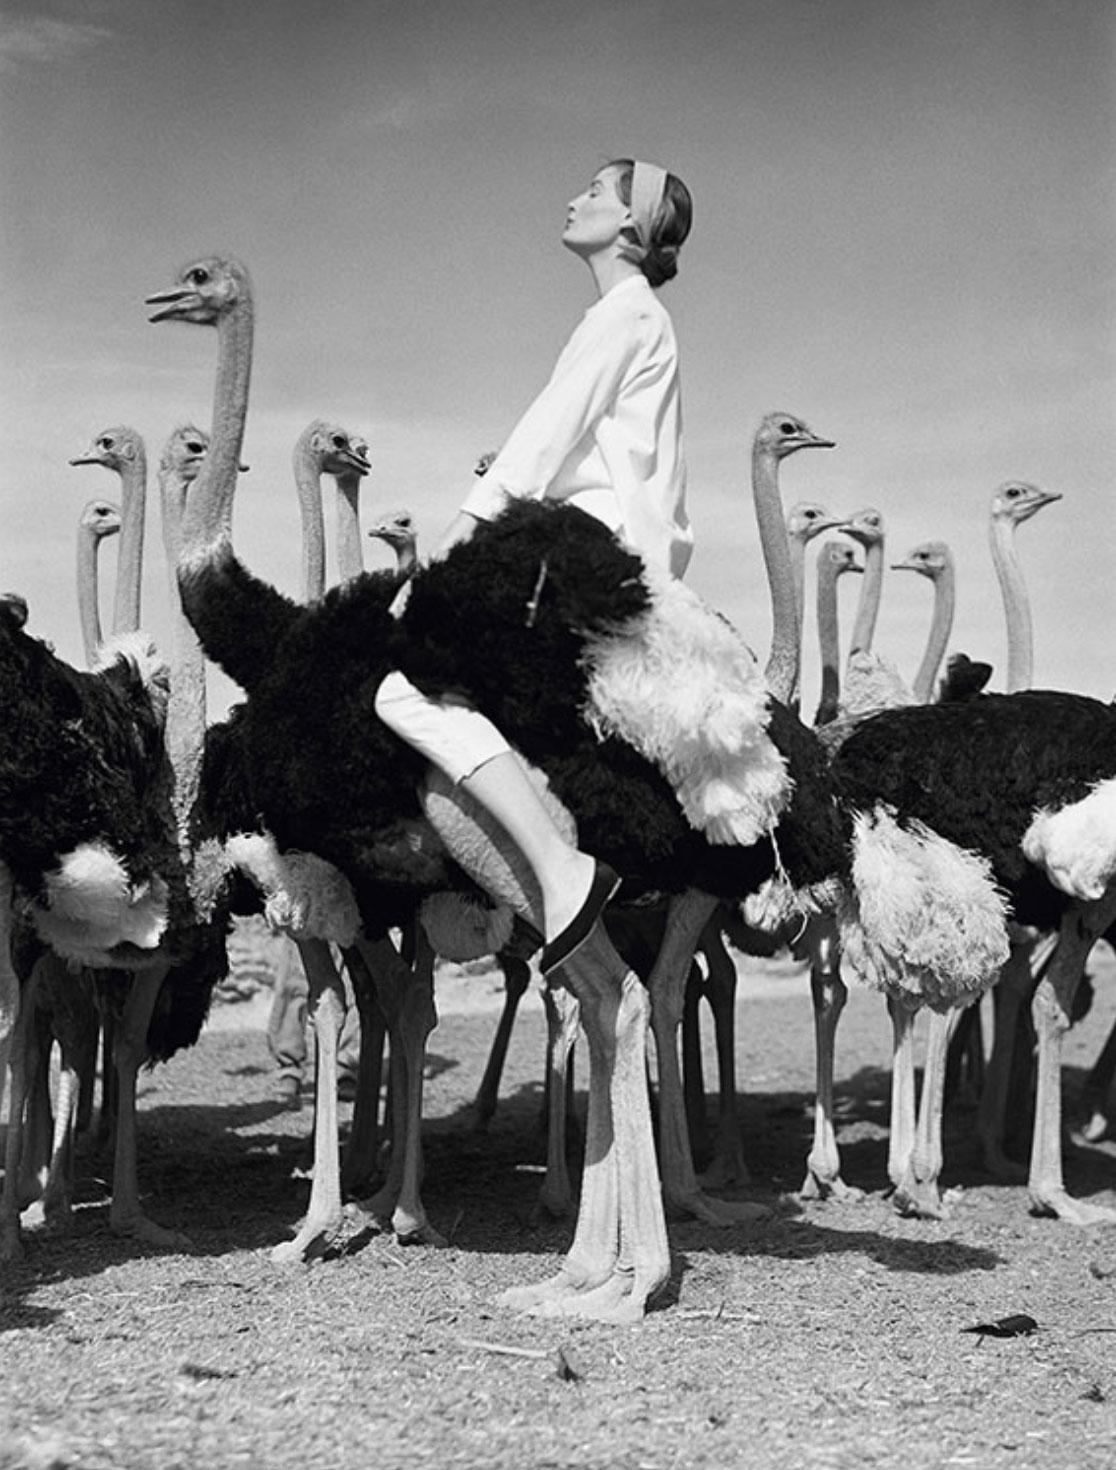 Norman Parkinson
Wenda and Ostriches
1951 (printed later)
C print
60 x 40 inches 
Estate stamped and numbered edition of 21 on verso
with certificate of authenticity from the Norman Parkinson Estate.

Wenda Parkinson wearing knee-buttoned jeans and